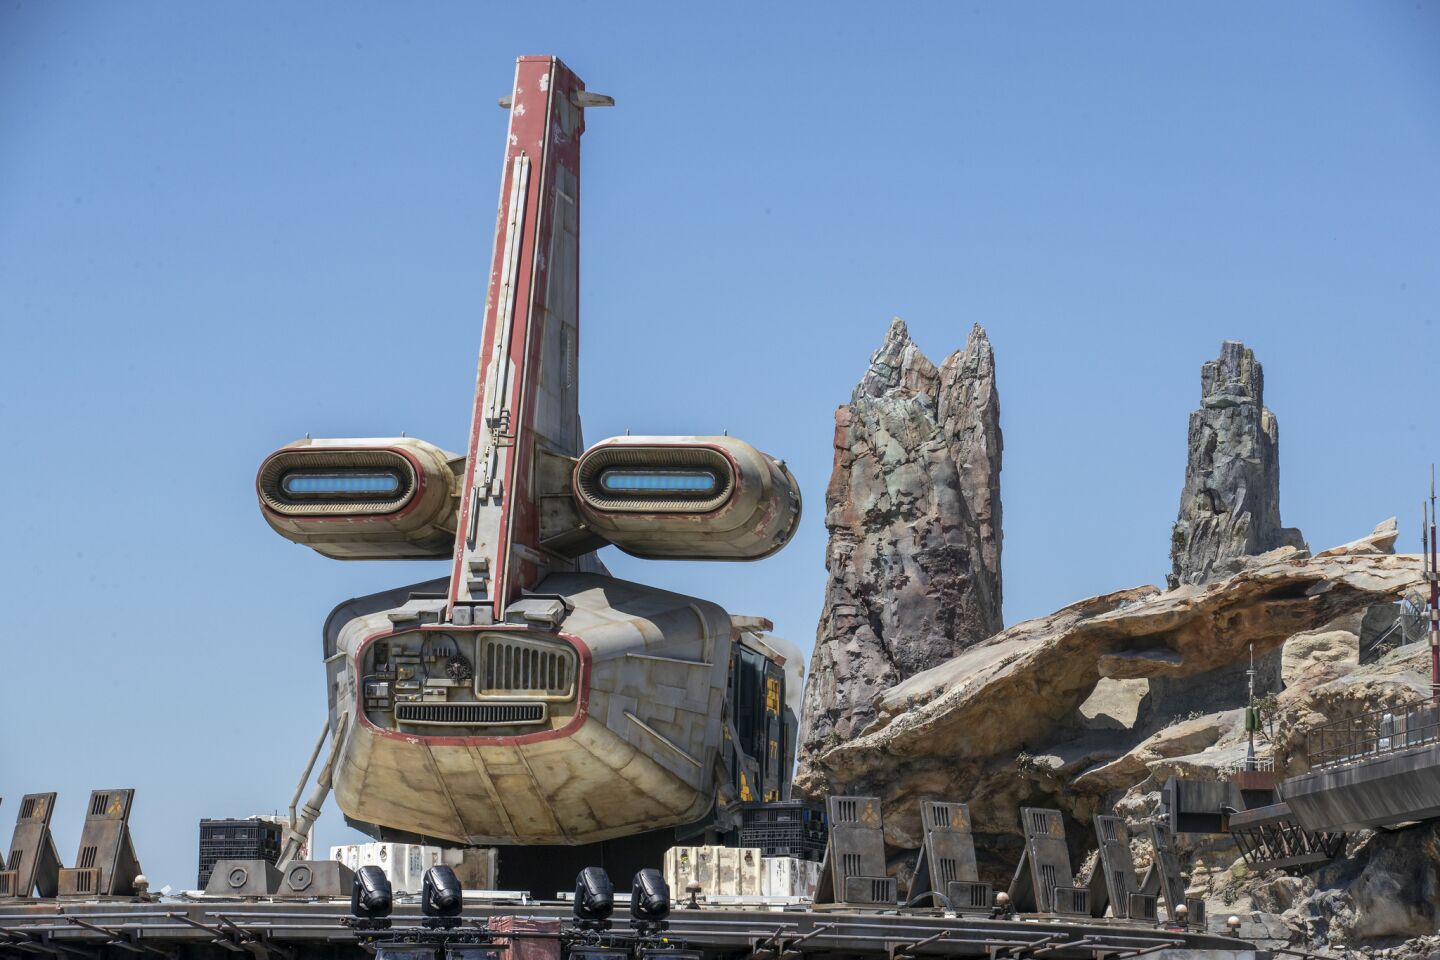 A view of a transport vehicle on top of Docking Bay 7 Food and Cargo inside Star Wars: Galaxy's Edge.